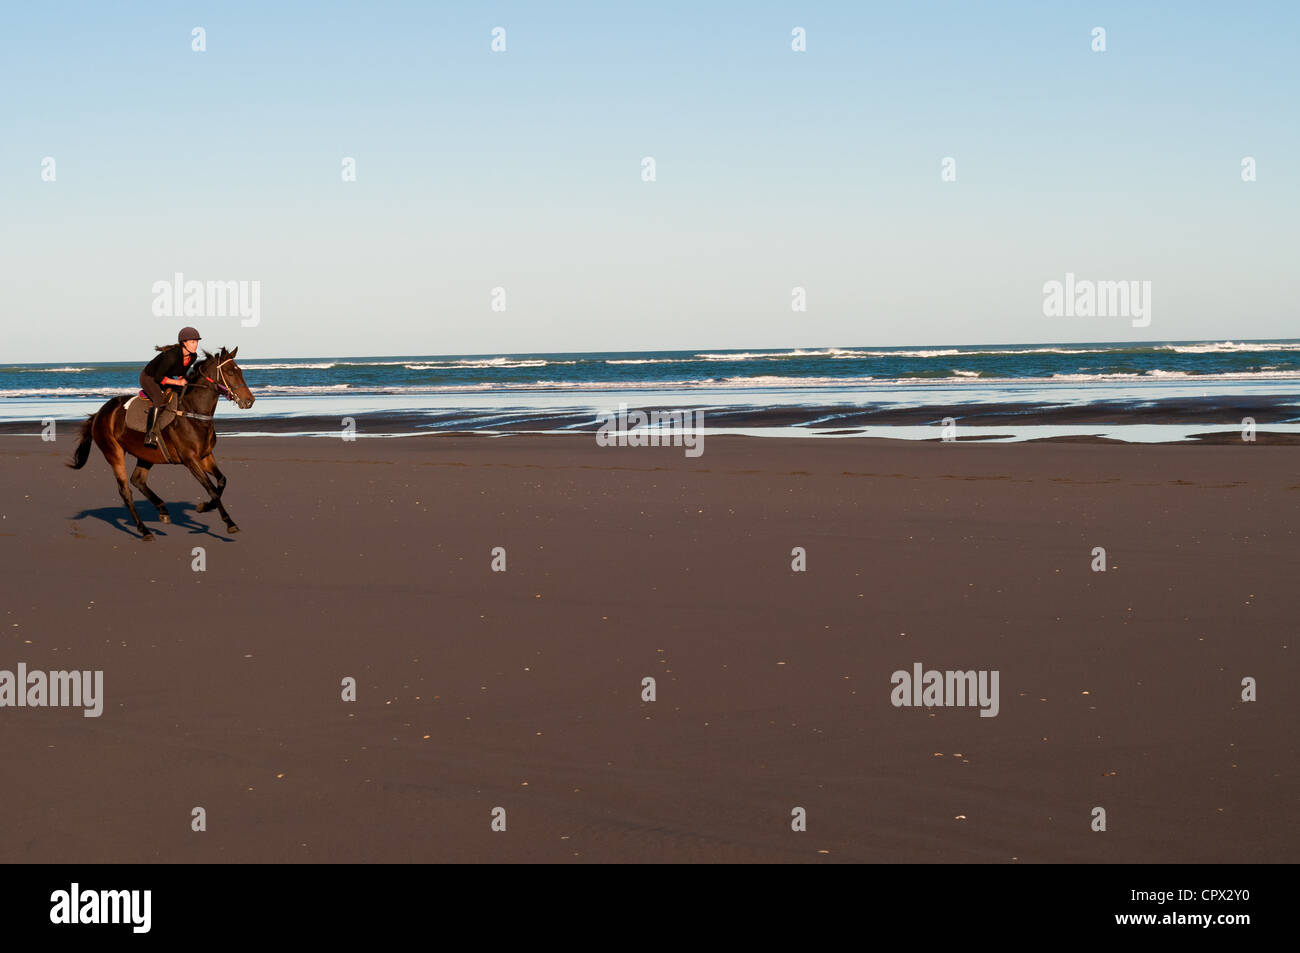 Mid adult woman riding horse on beach Stock Photo